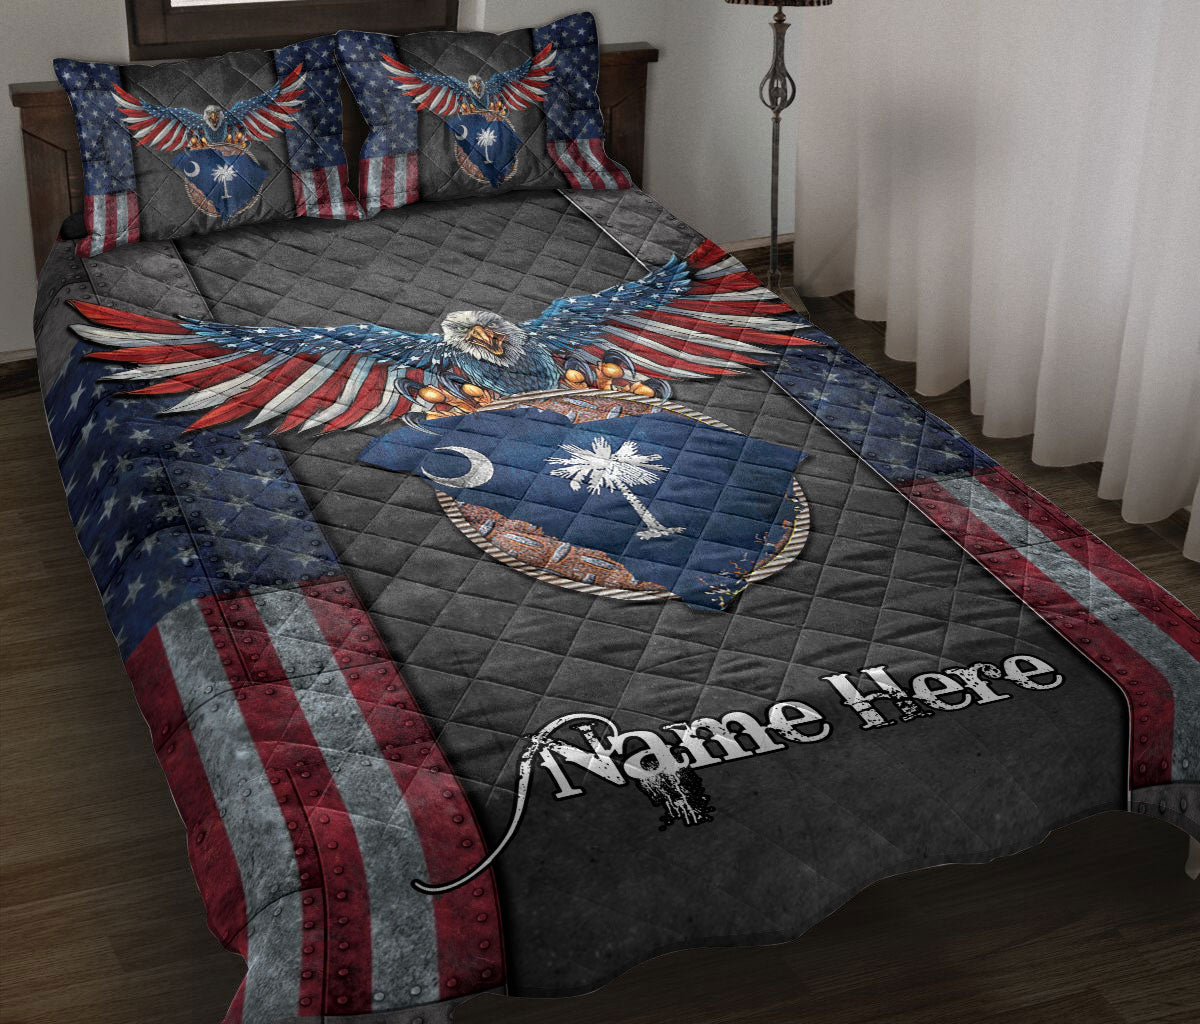 Ohaprints-Quilt-Bed-Set-Pillowcase-Eagle-South-Carolina-State-Map-Flag-American-Us-Flag-Custom-Personalized-Name-Blanket-Bedspread-Bedding-2913-Throw (55'' x 60'')